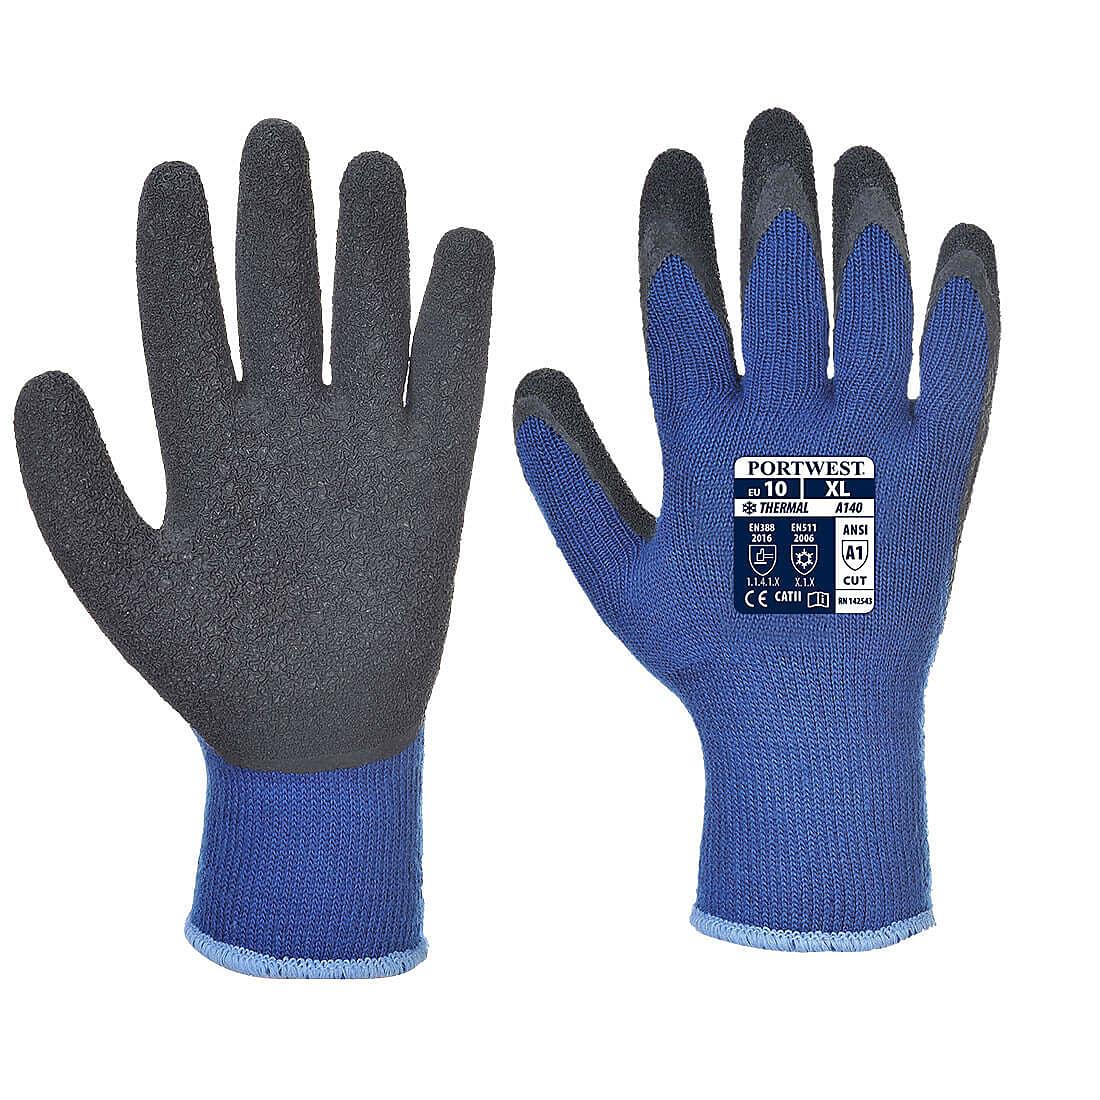 Portwest Thermal Grip Gloves - Latex in Blue / Black (Product Code: A140)